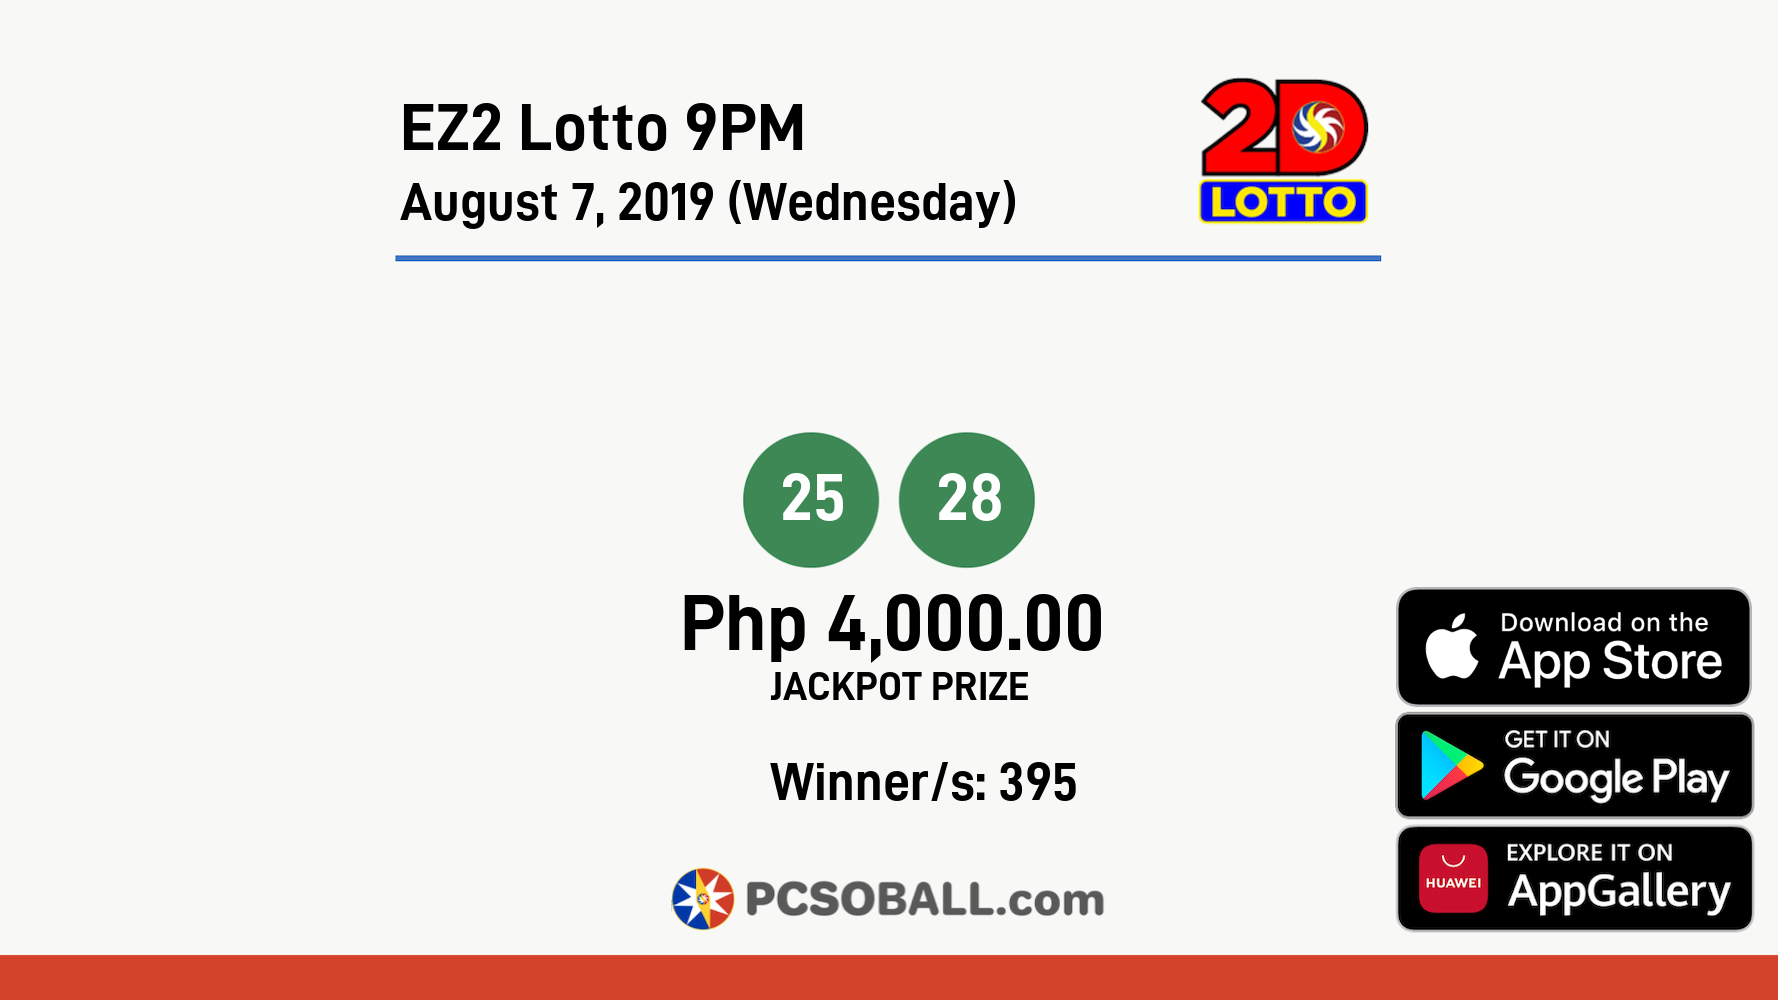 EZ2 Lotto 9PM August 7, 2019 (Wednesday) Result